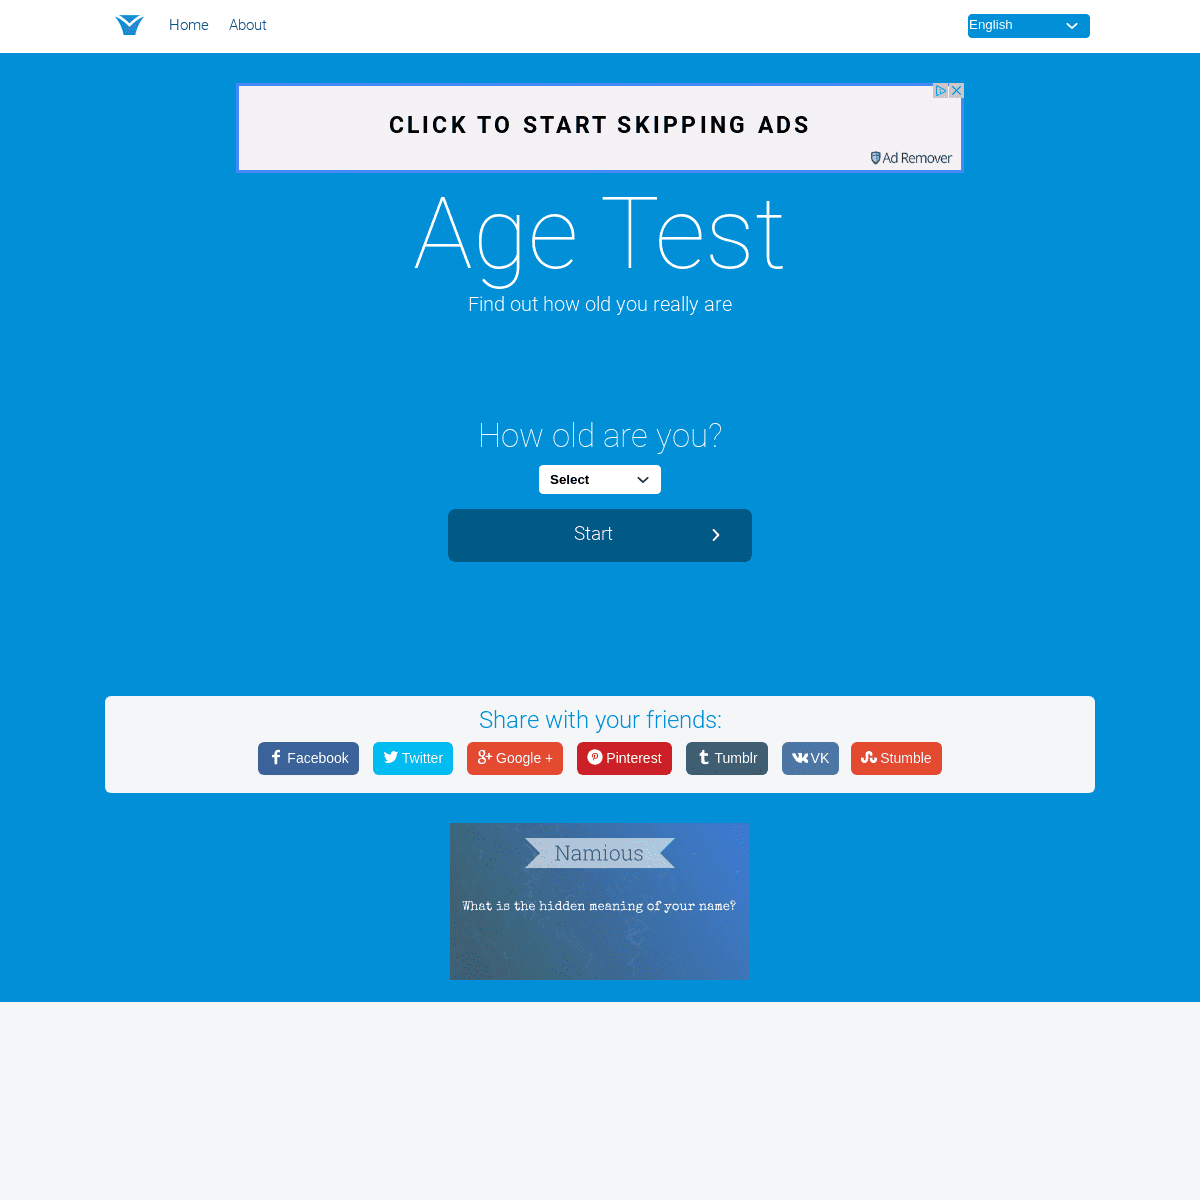 A complete backup of age-test.com